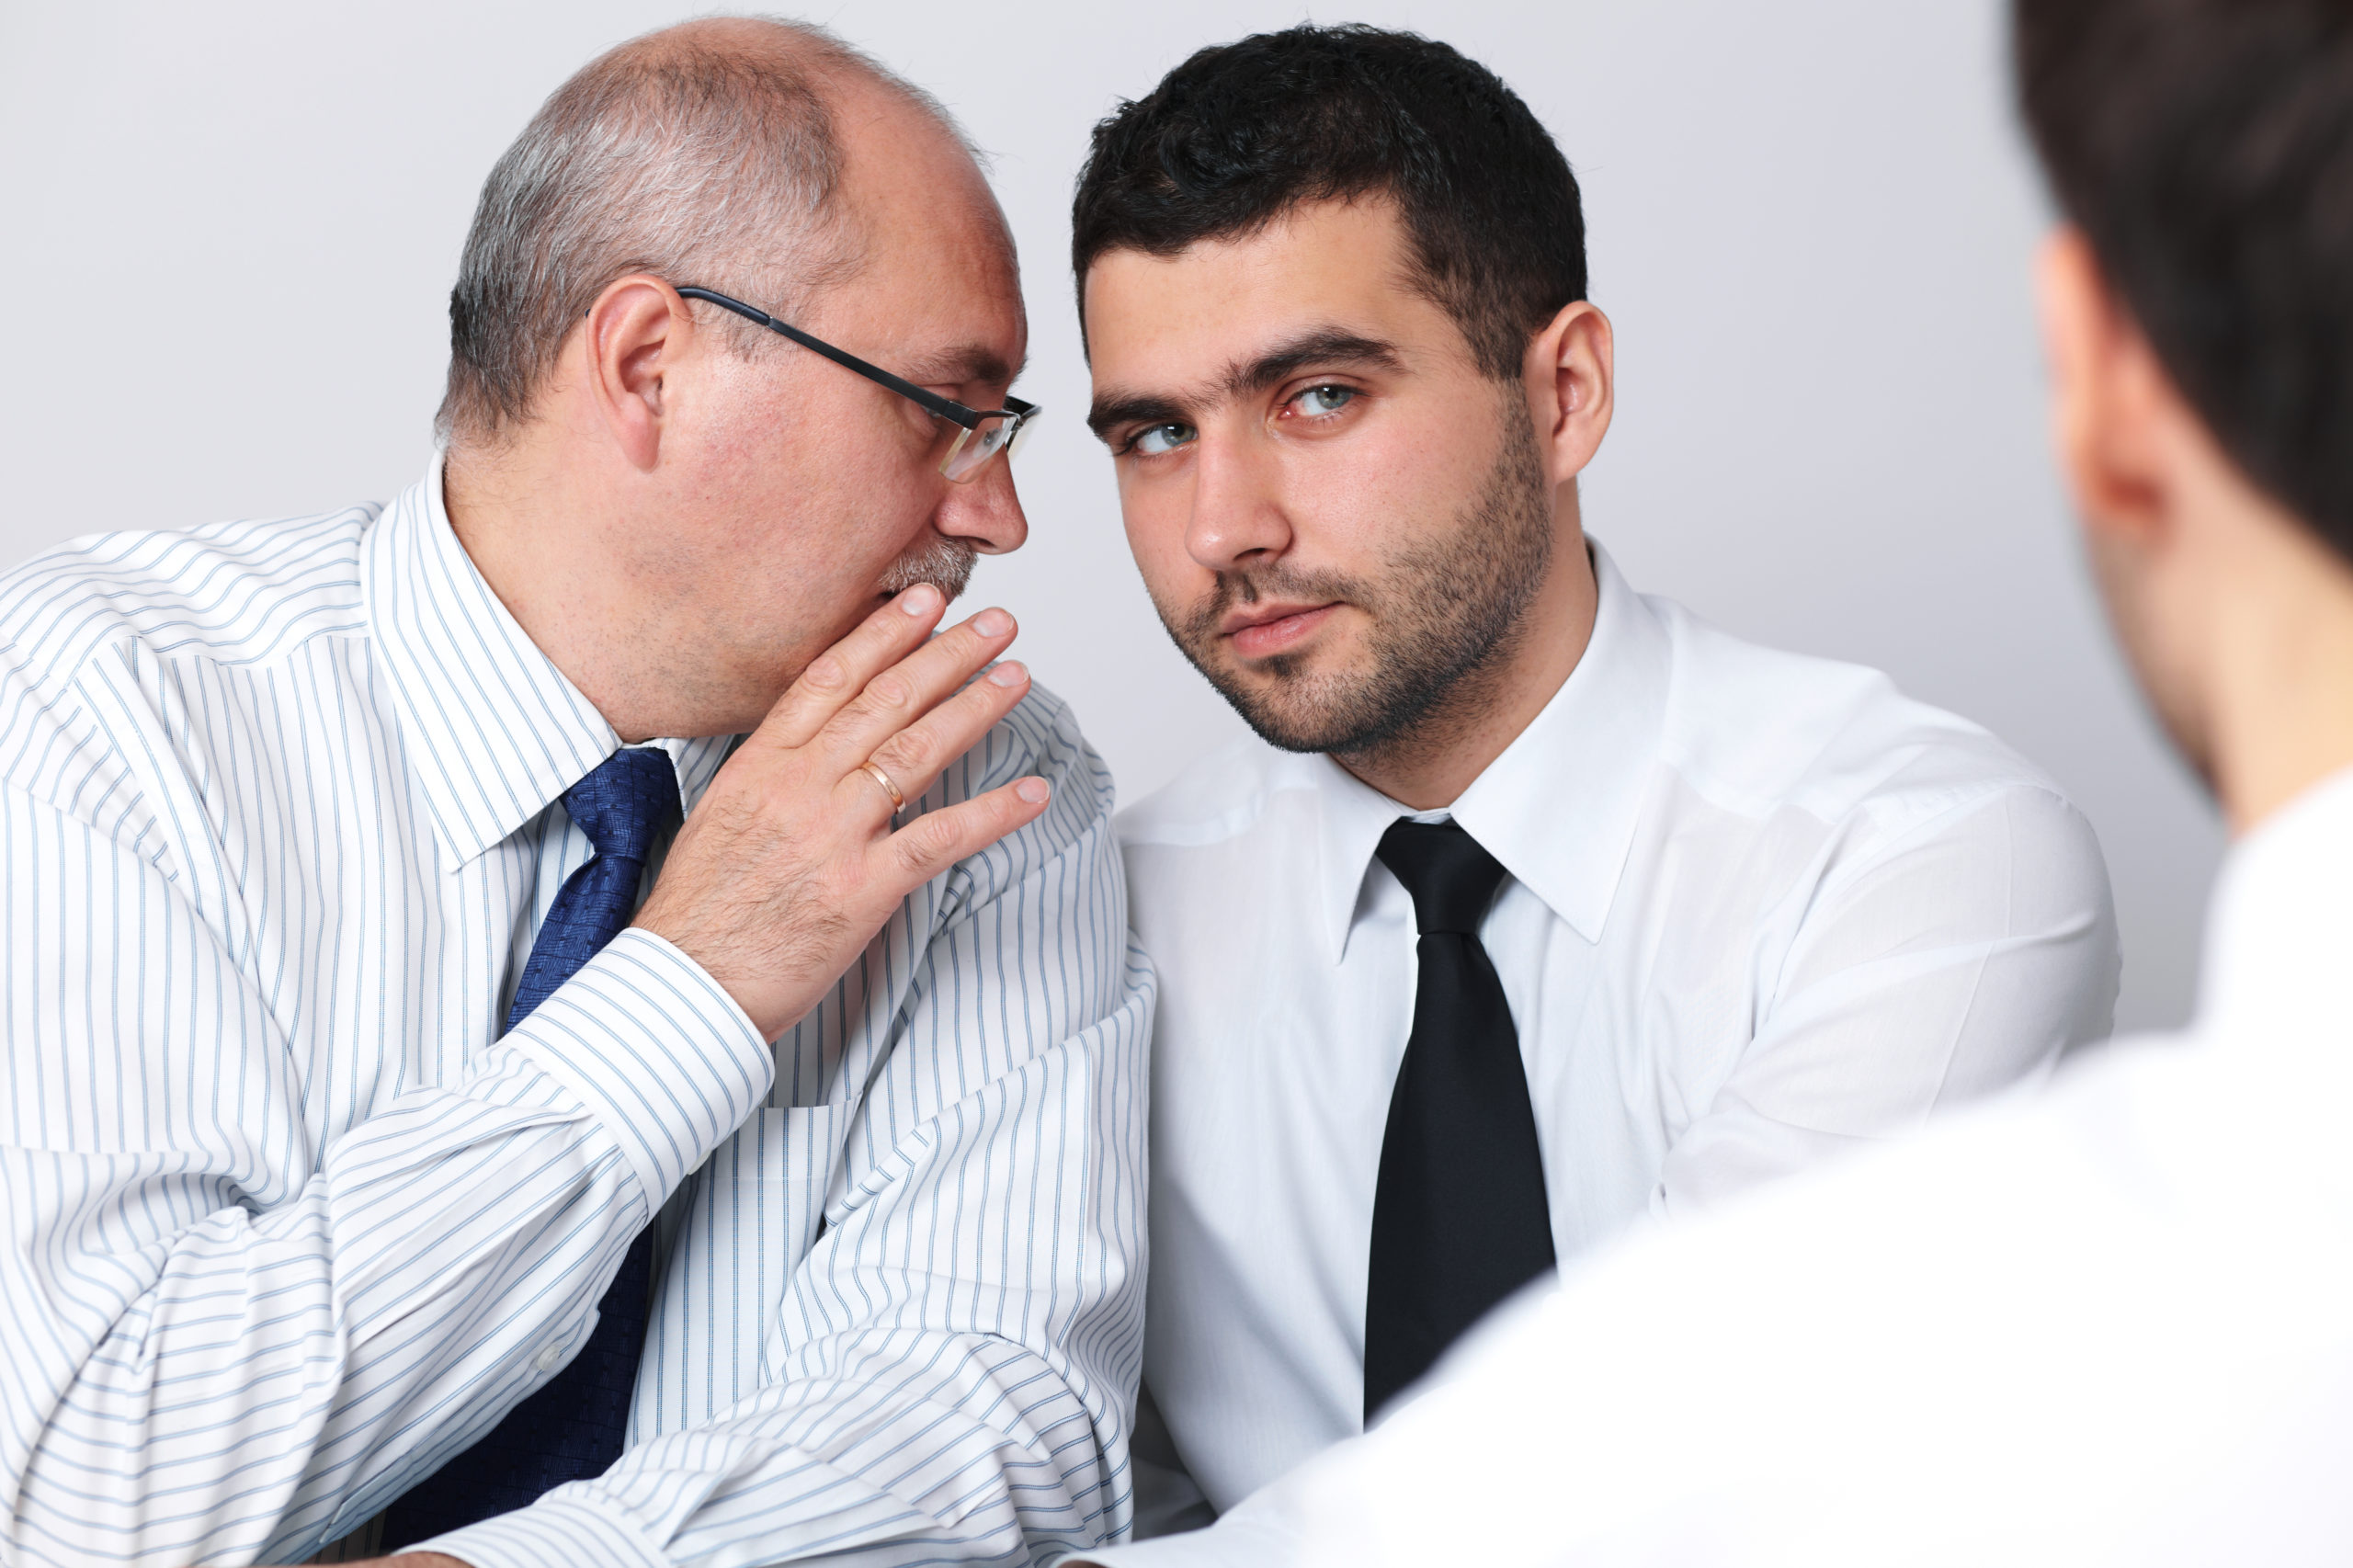 Man whispering to a man while filing personal injury claim in Florida